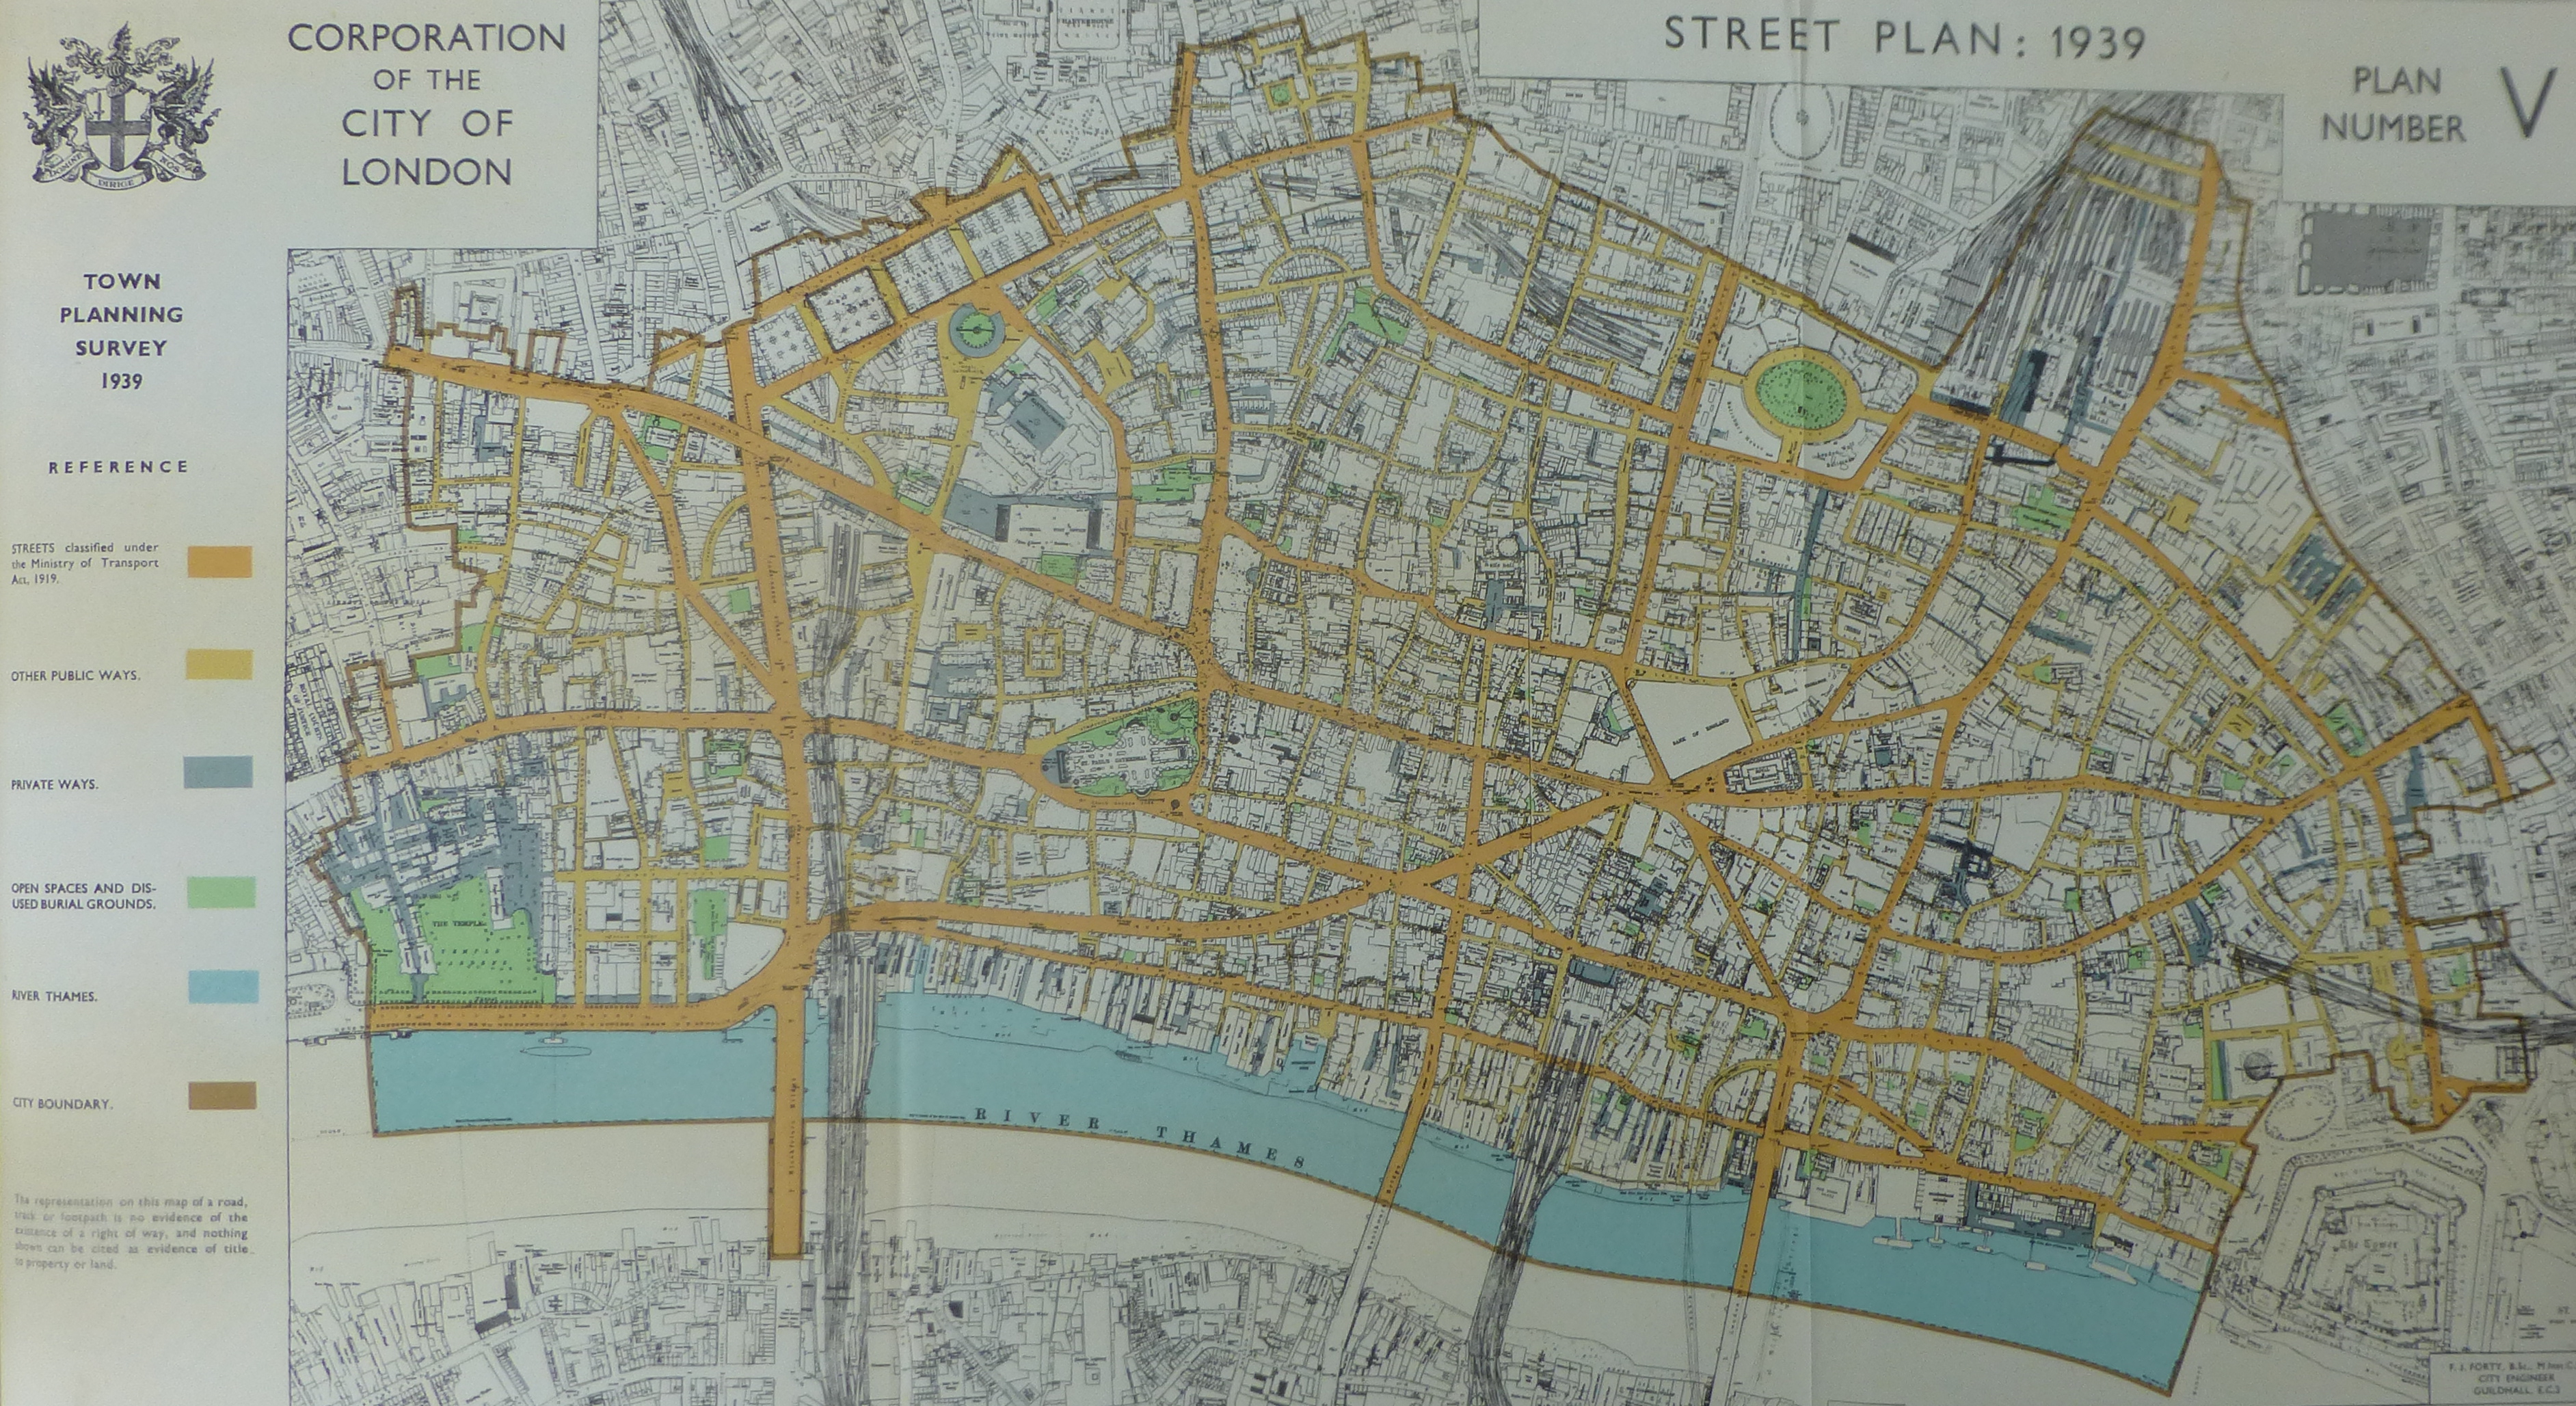 CITY OF LONDON.Post-war Reconstruction plans TRAFFIC CIRCULATION 1944 old map 